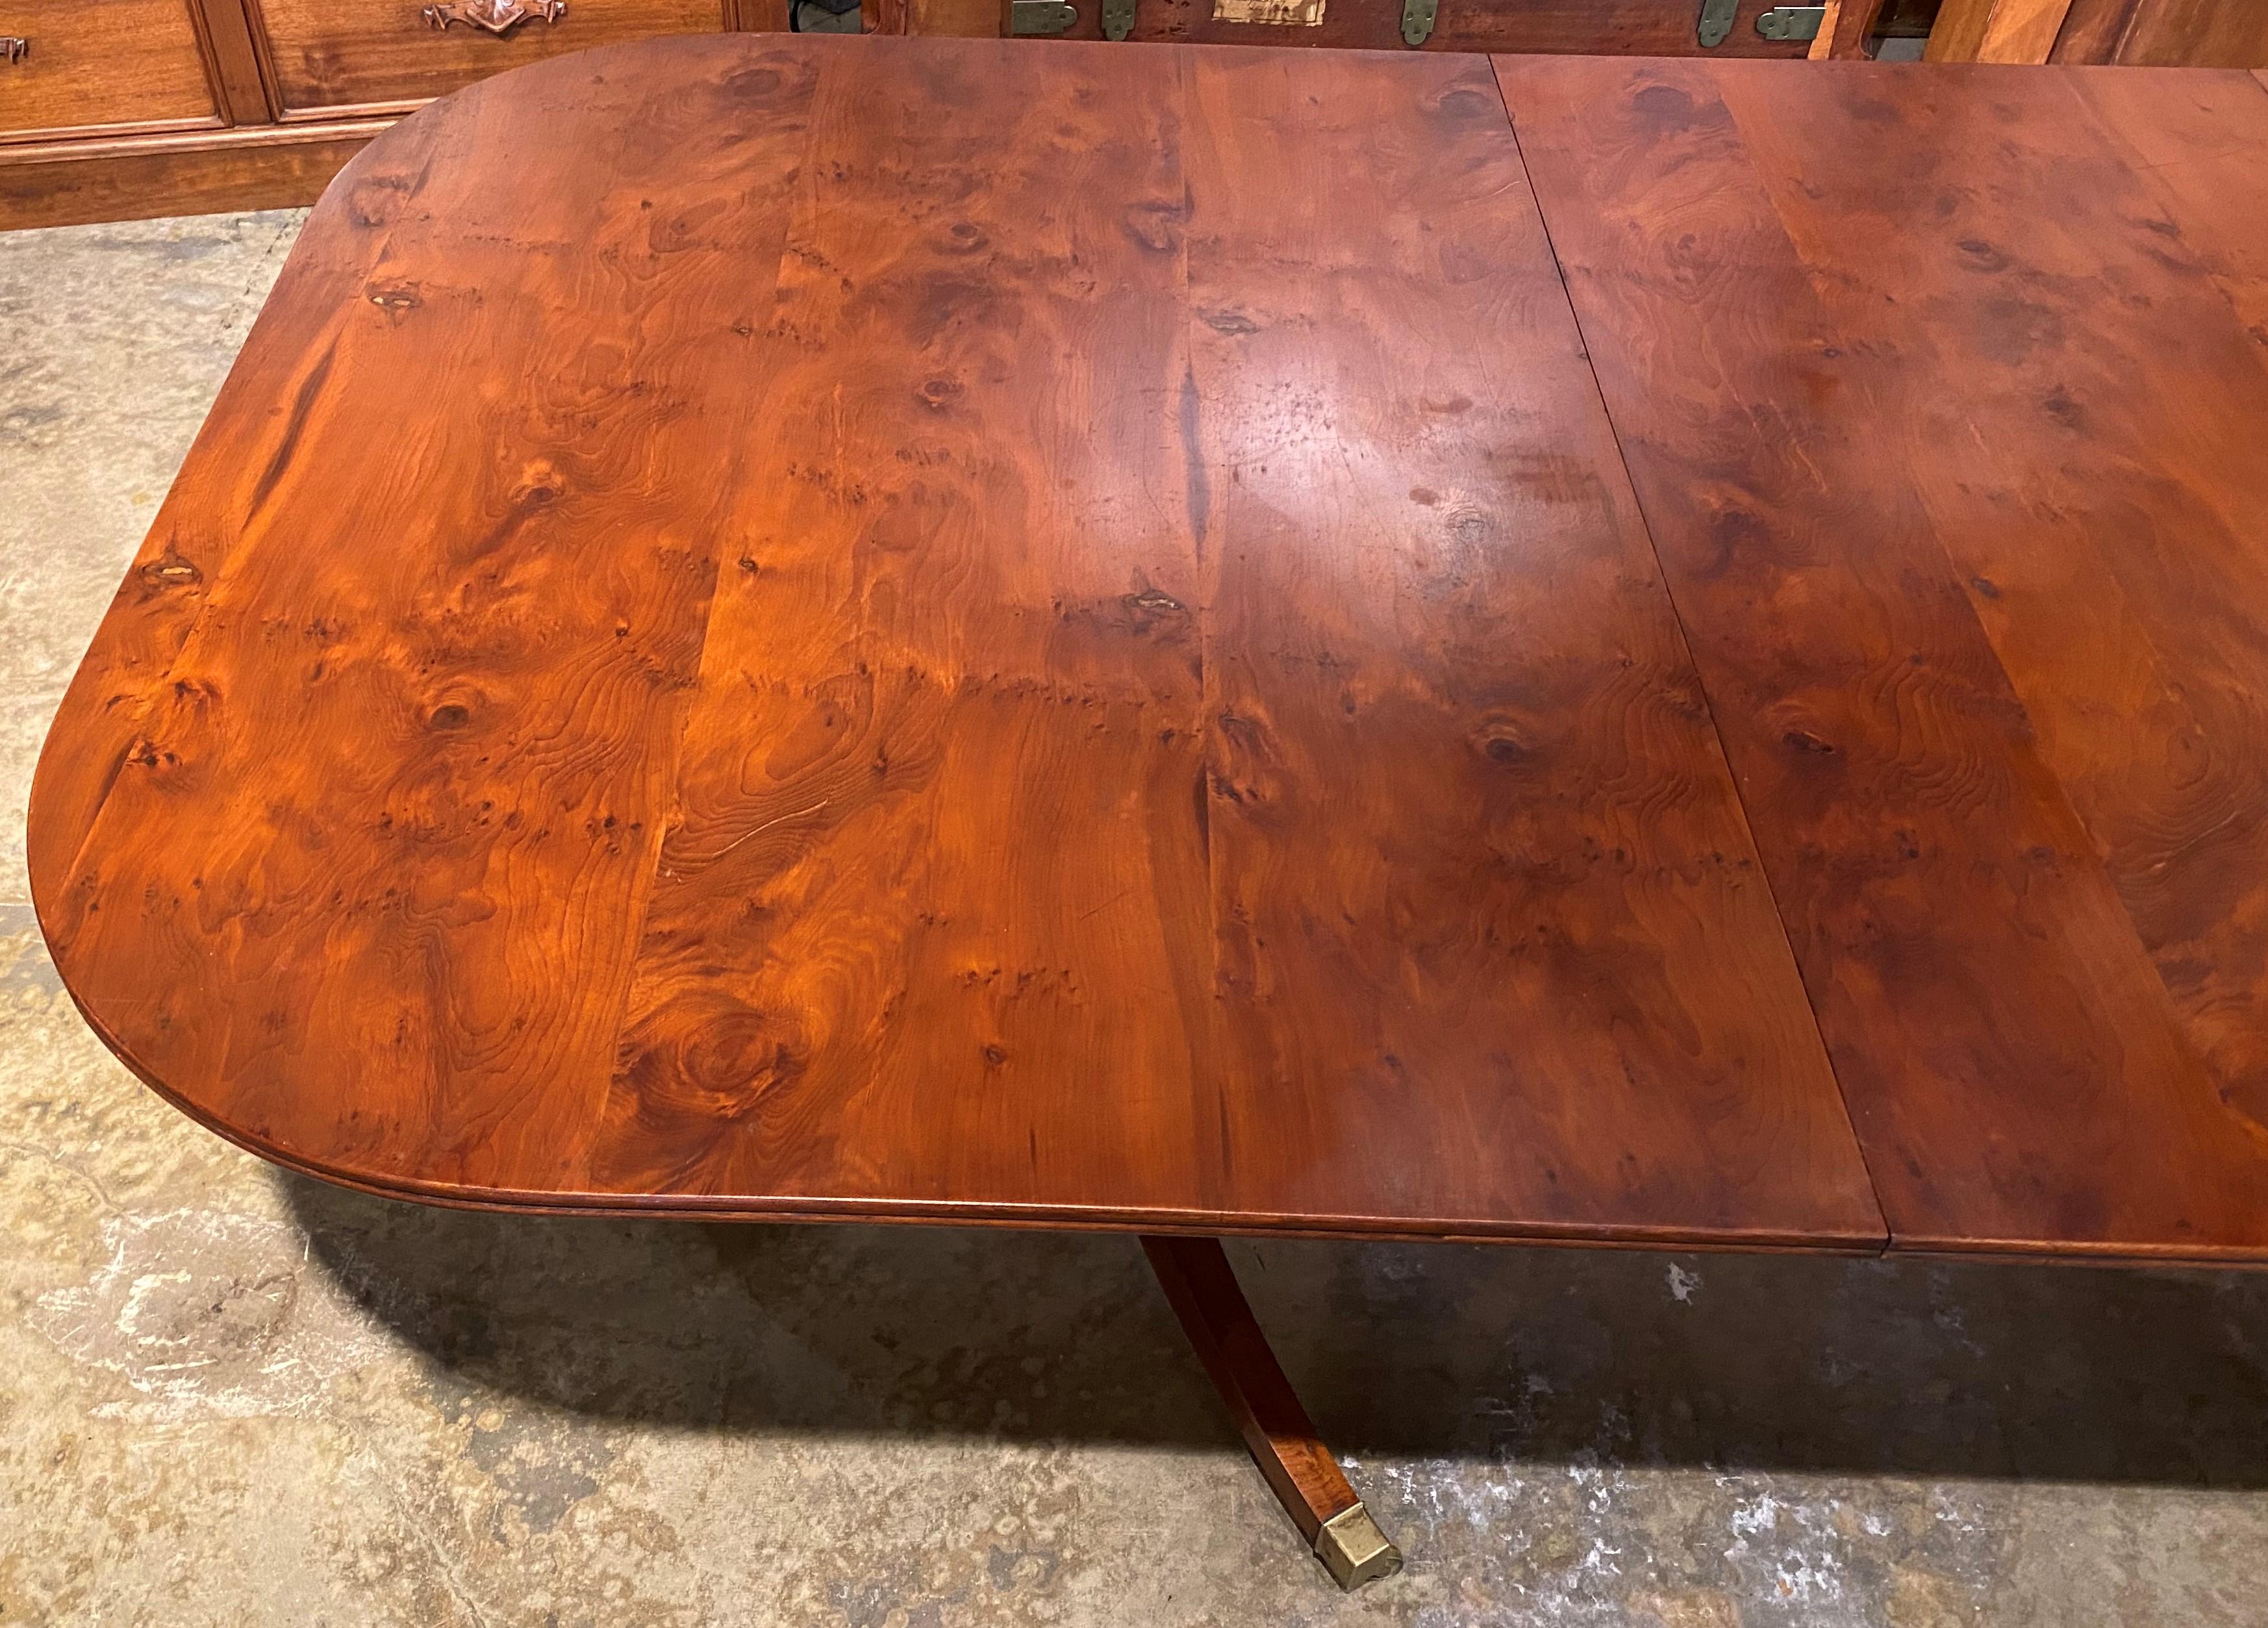 Hand-Carved 20th Century English Yew Wood Double Pedestal Dining Table with One Leaf